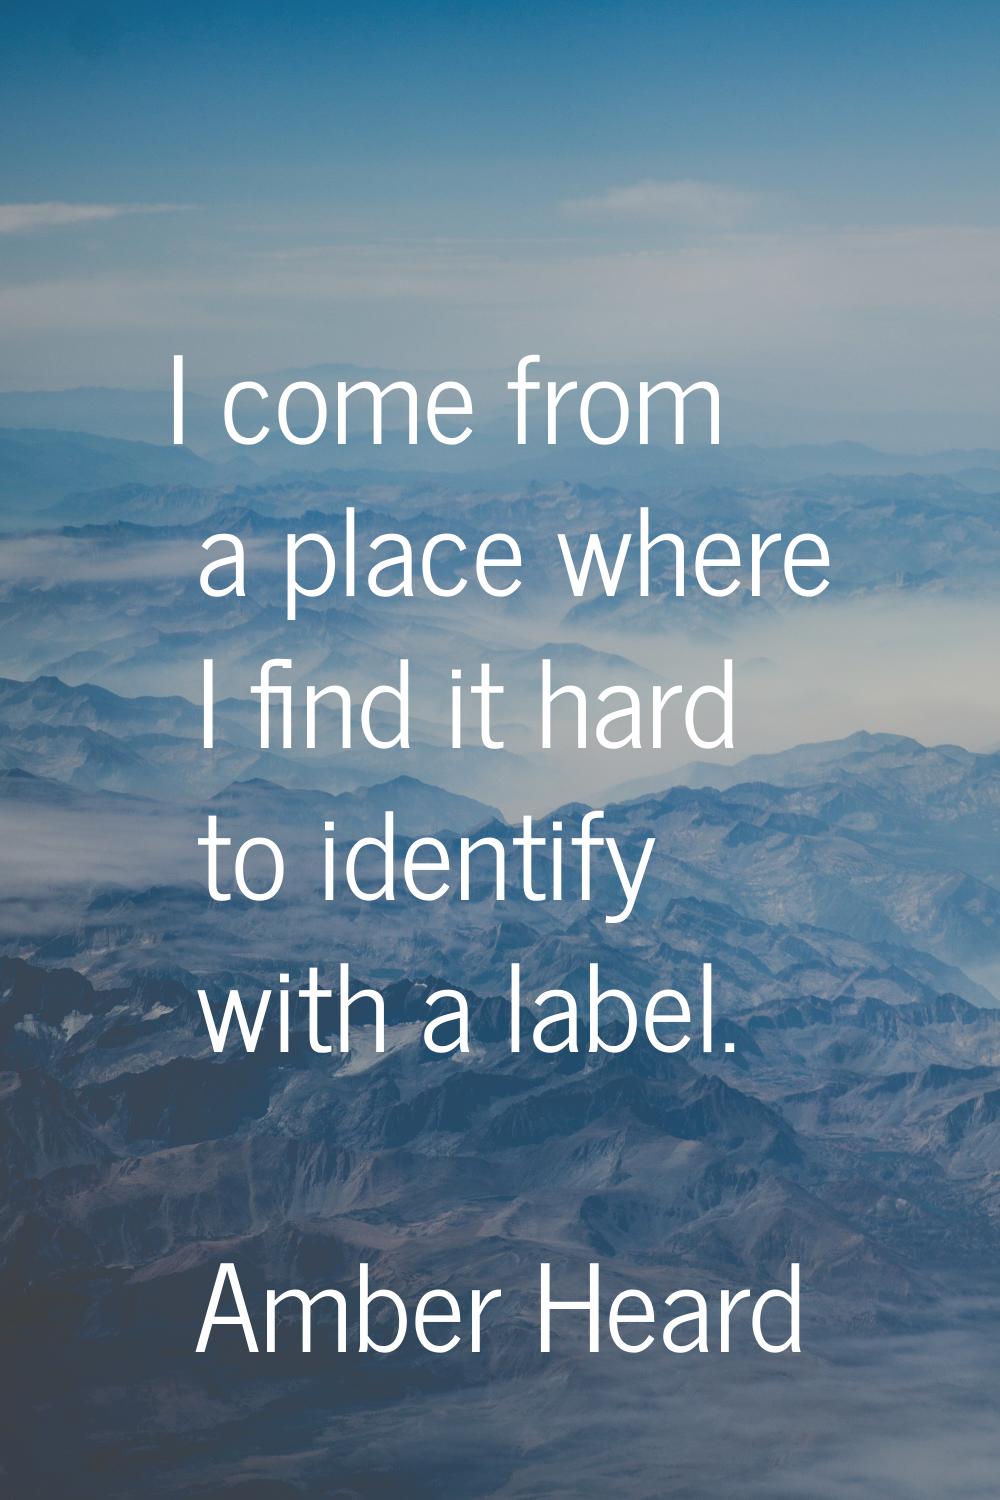 I come from a place where I find it hard to identify with a label.